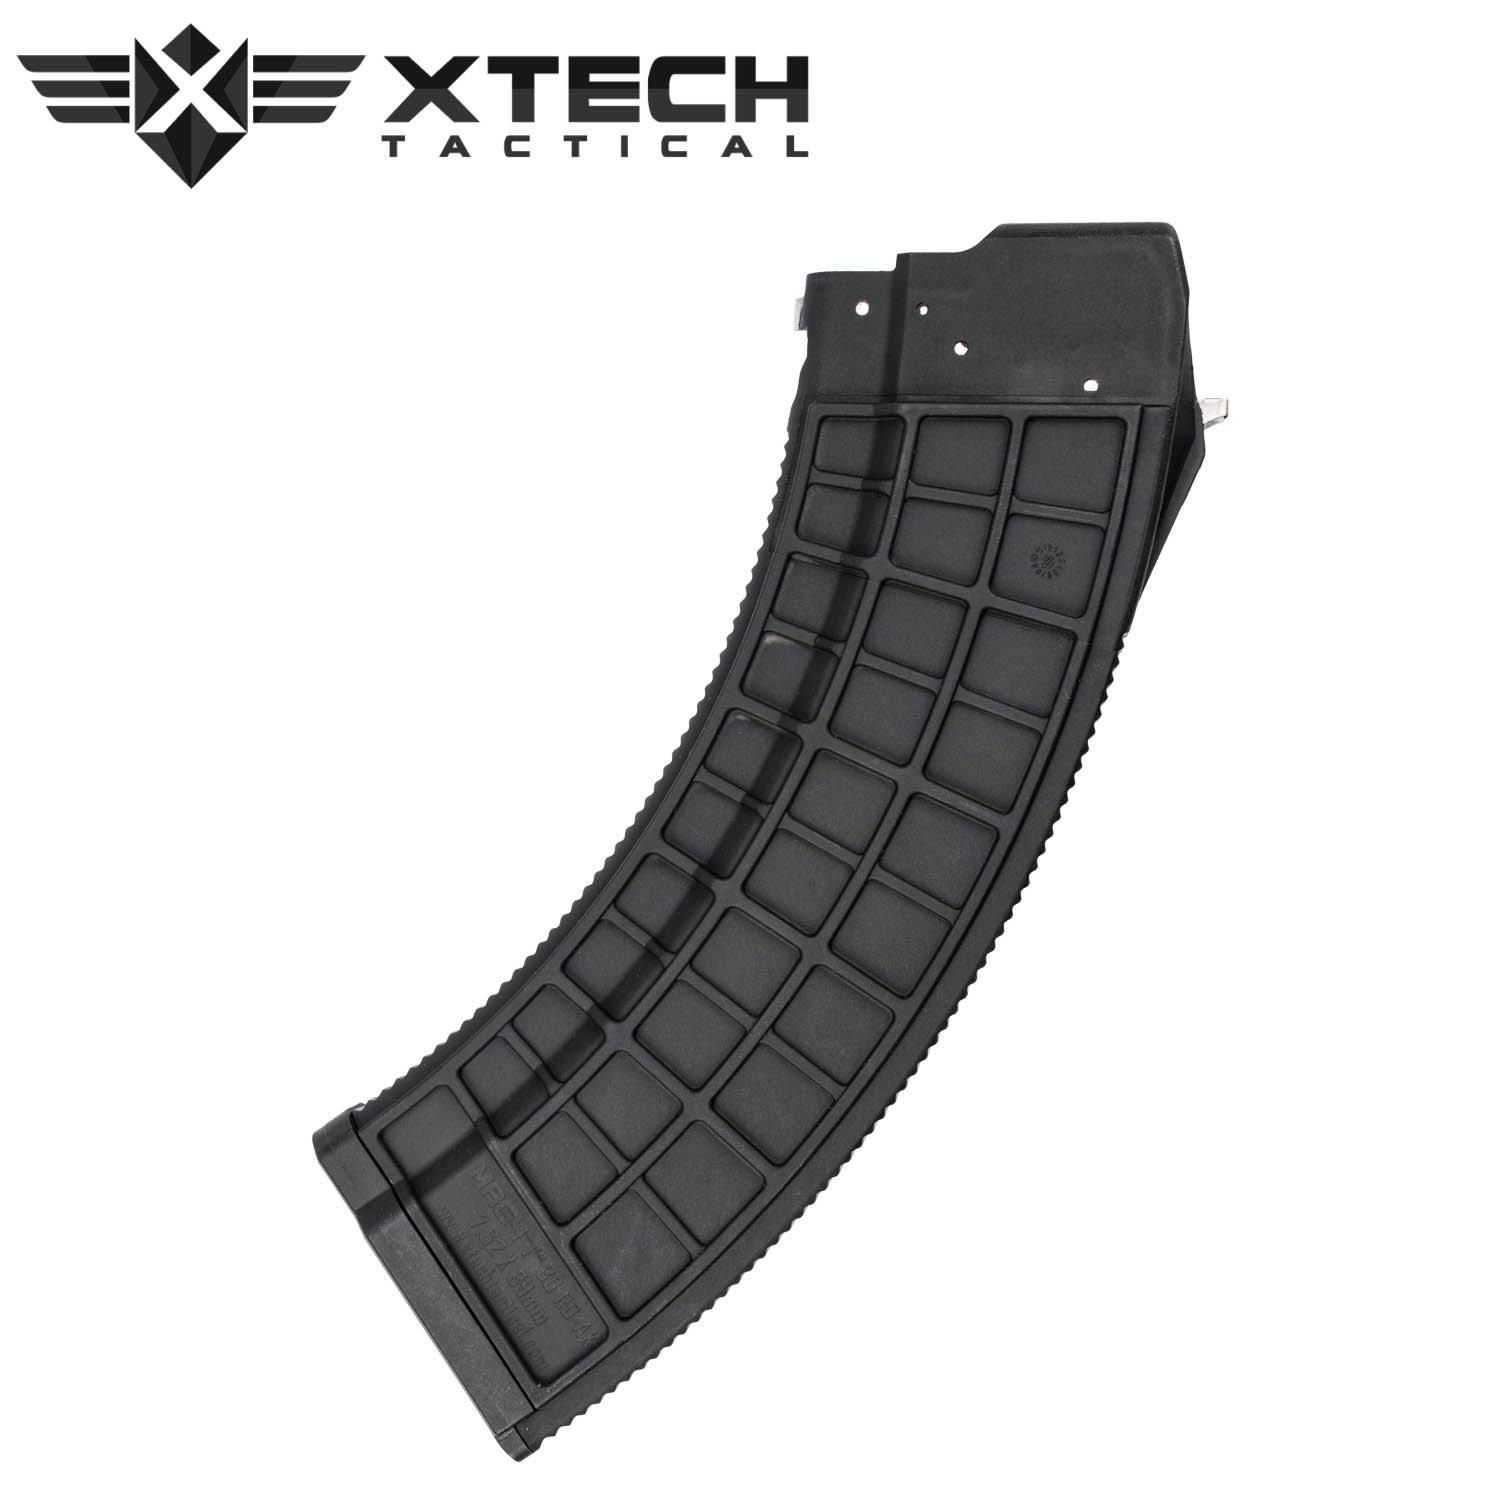 Xtech Tactical Mag47 Ak 47 Magazine 30 Round 7 62x39mm Mgw